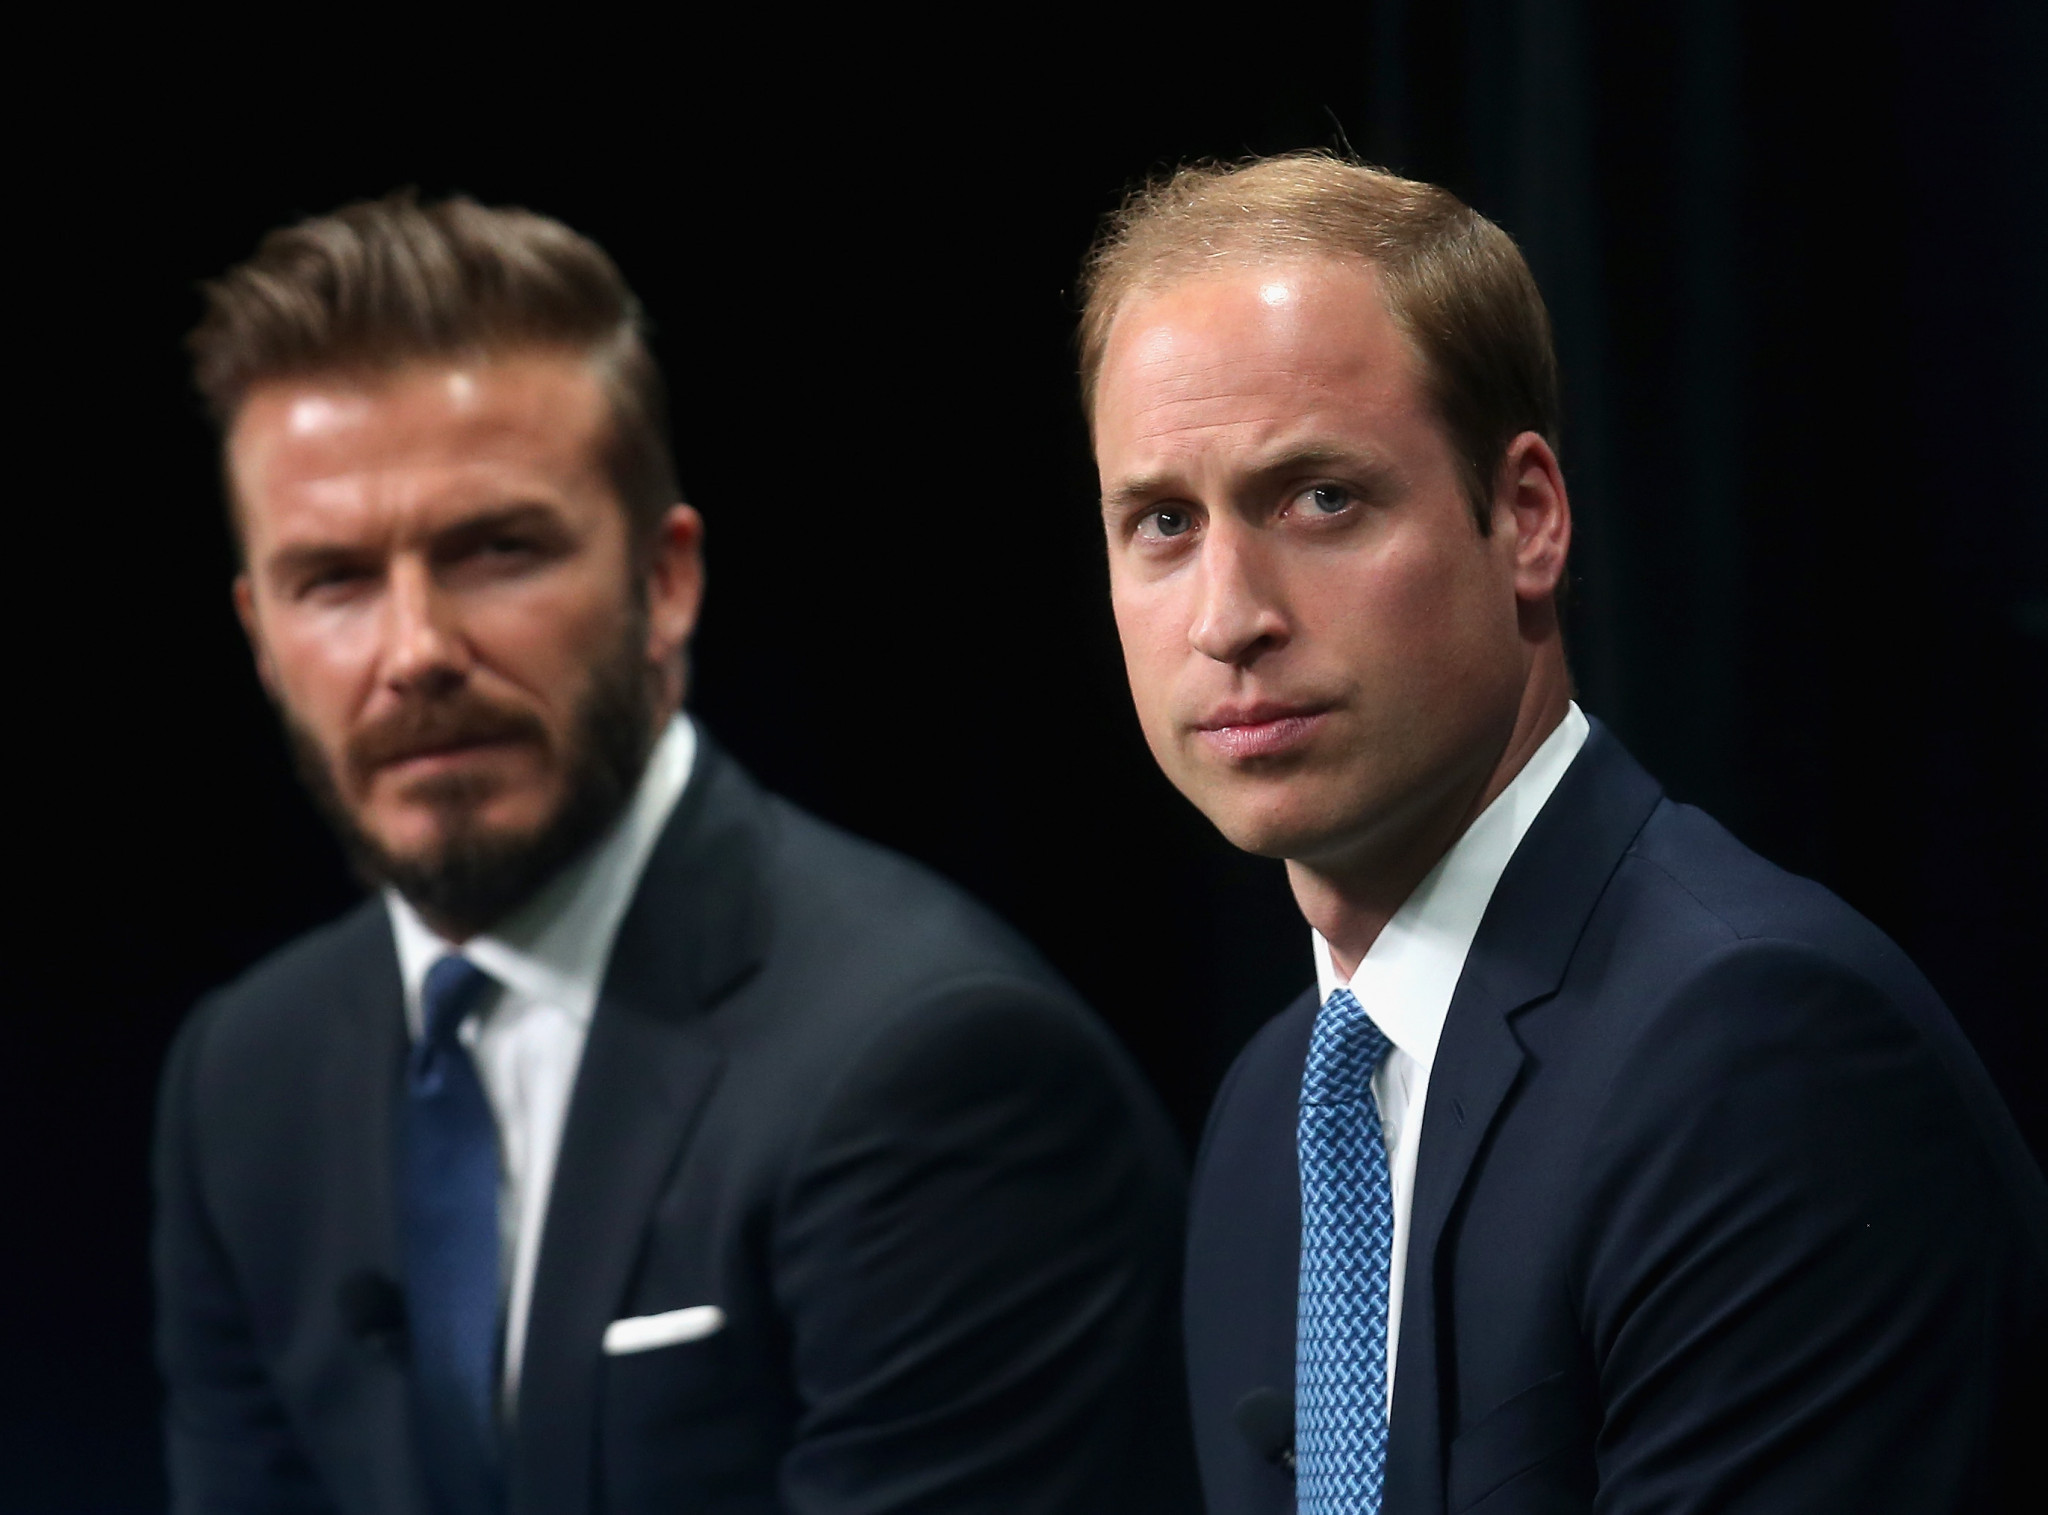 England's disastrous bid for the World Cup was backed by Prince William and David Beckham ©Getty Images